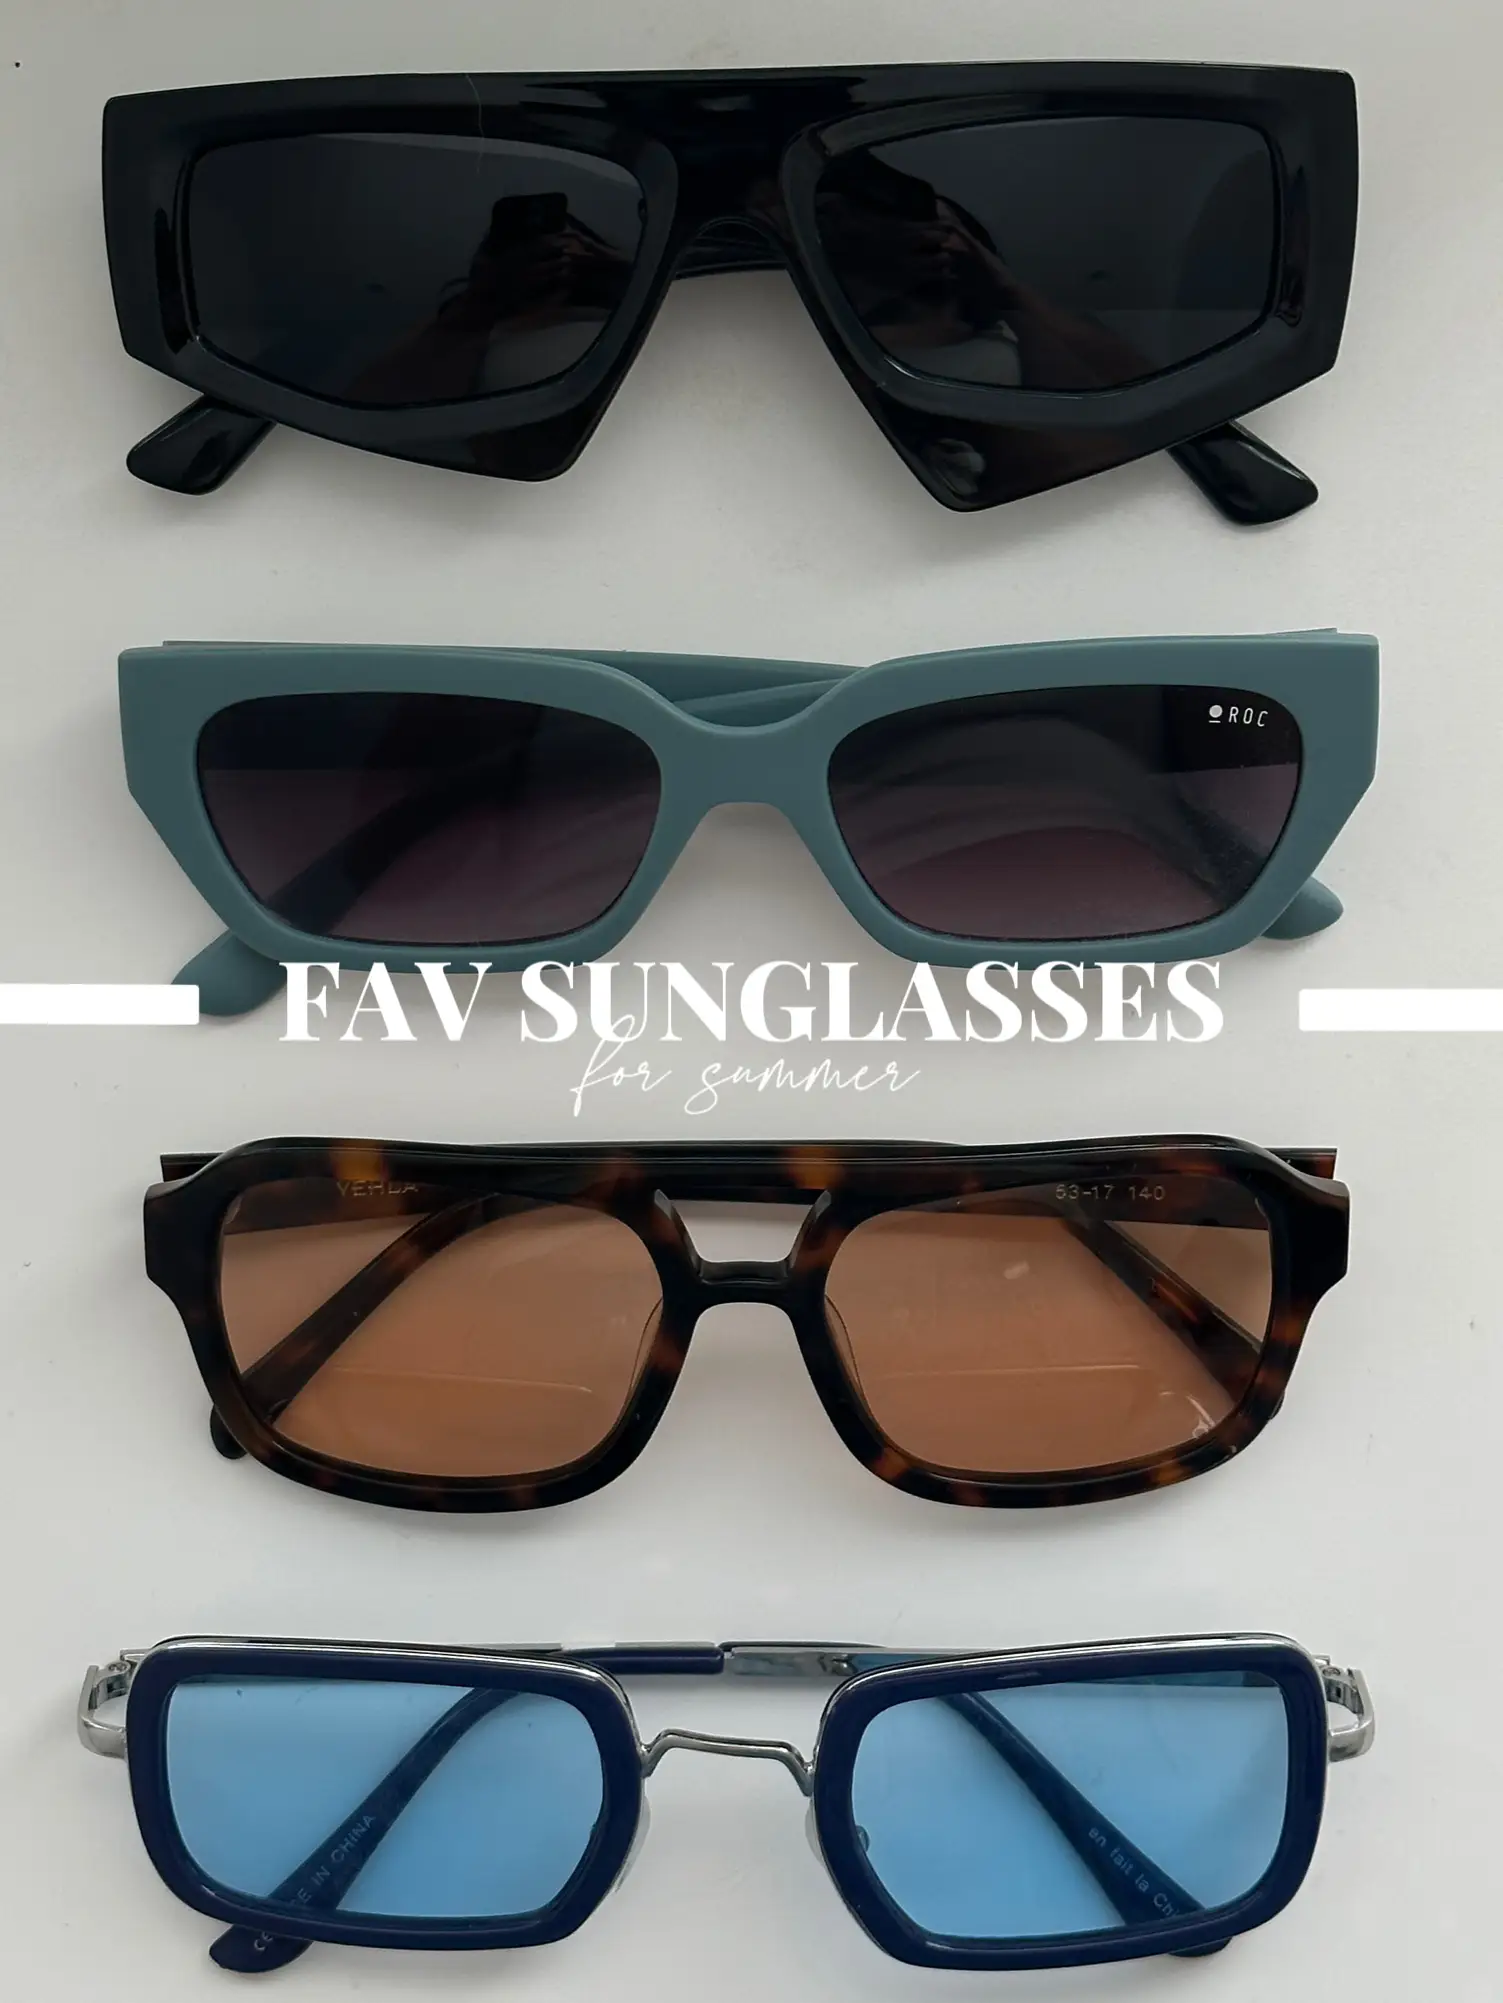 How to pair the eyewear with preppy style? – SOJOS